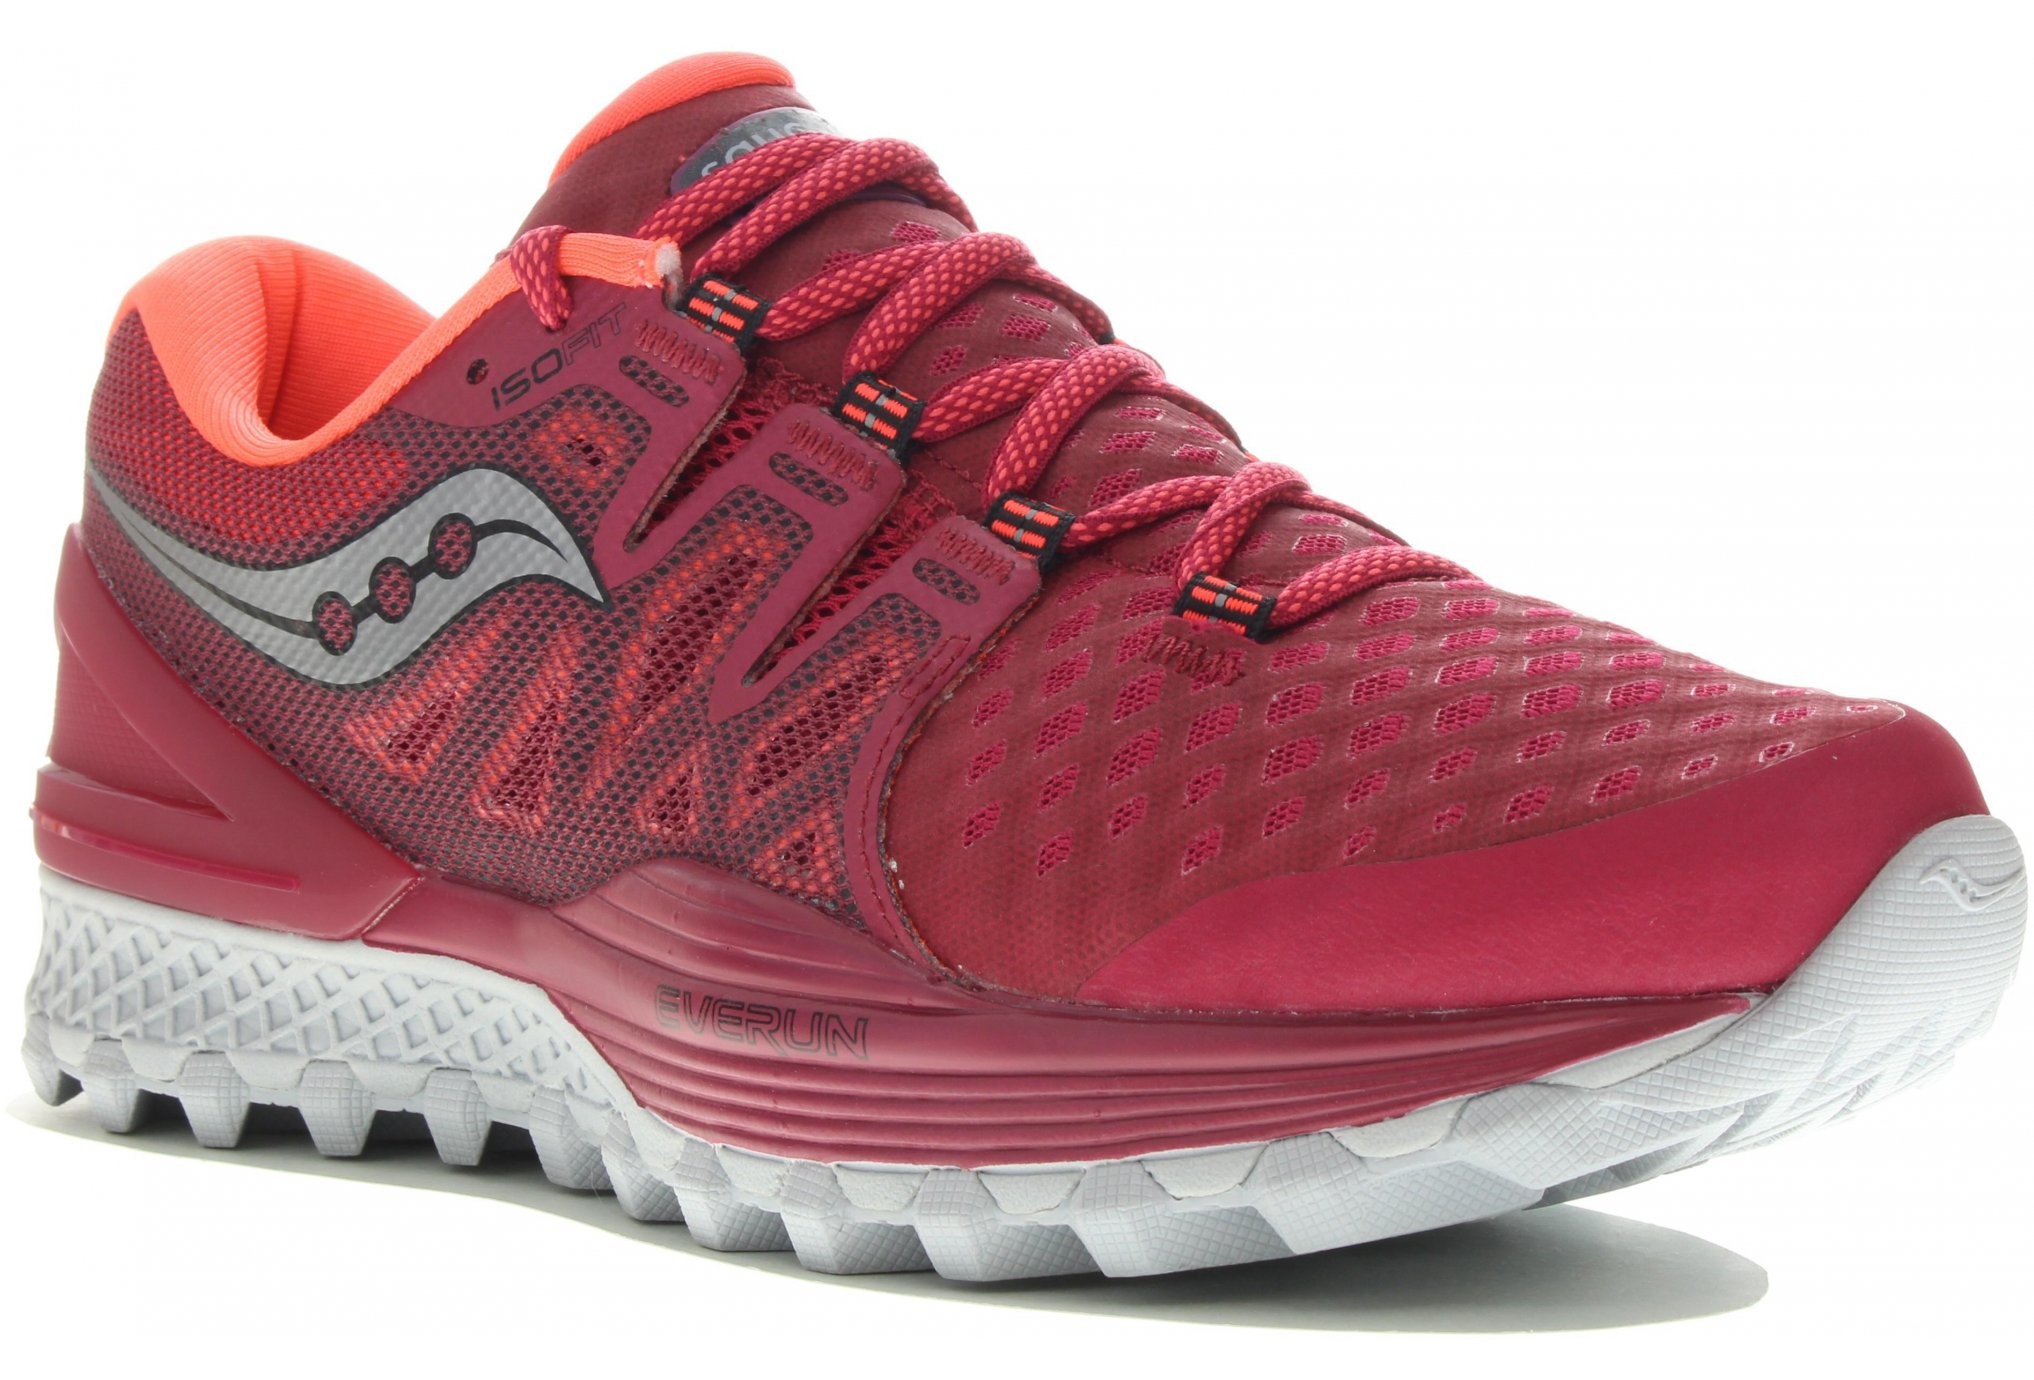 Saucony Xodus iso 2 w dittique chaussures femme